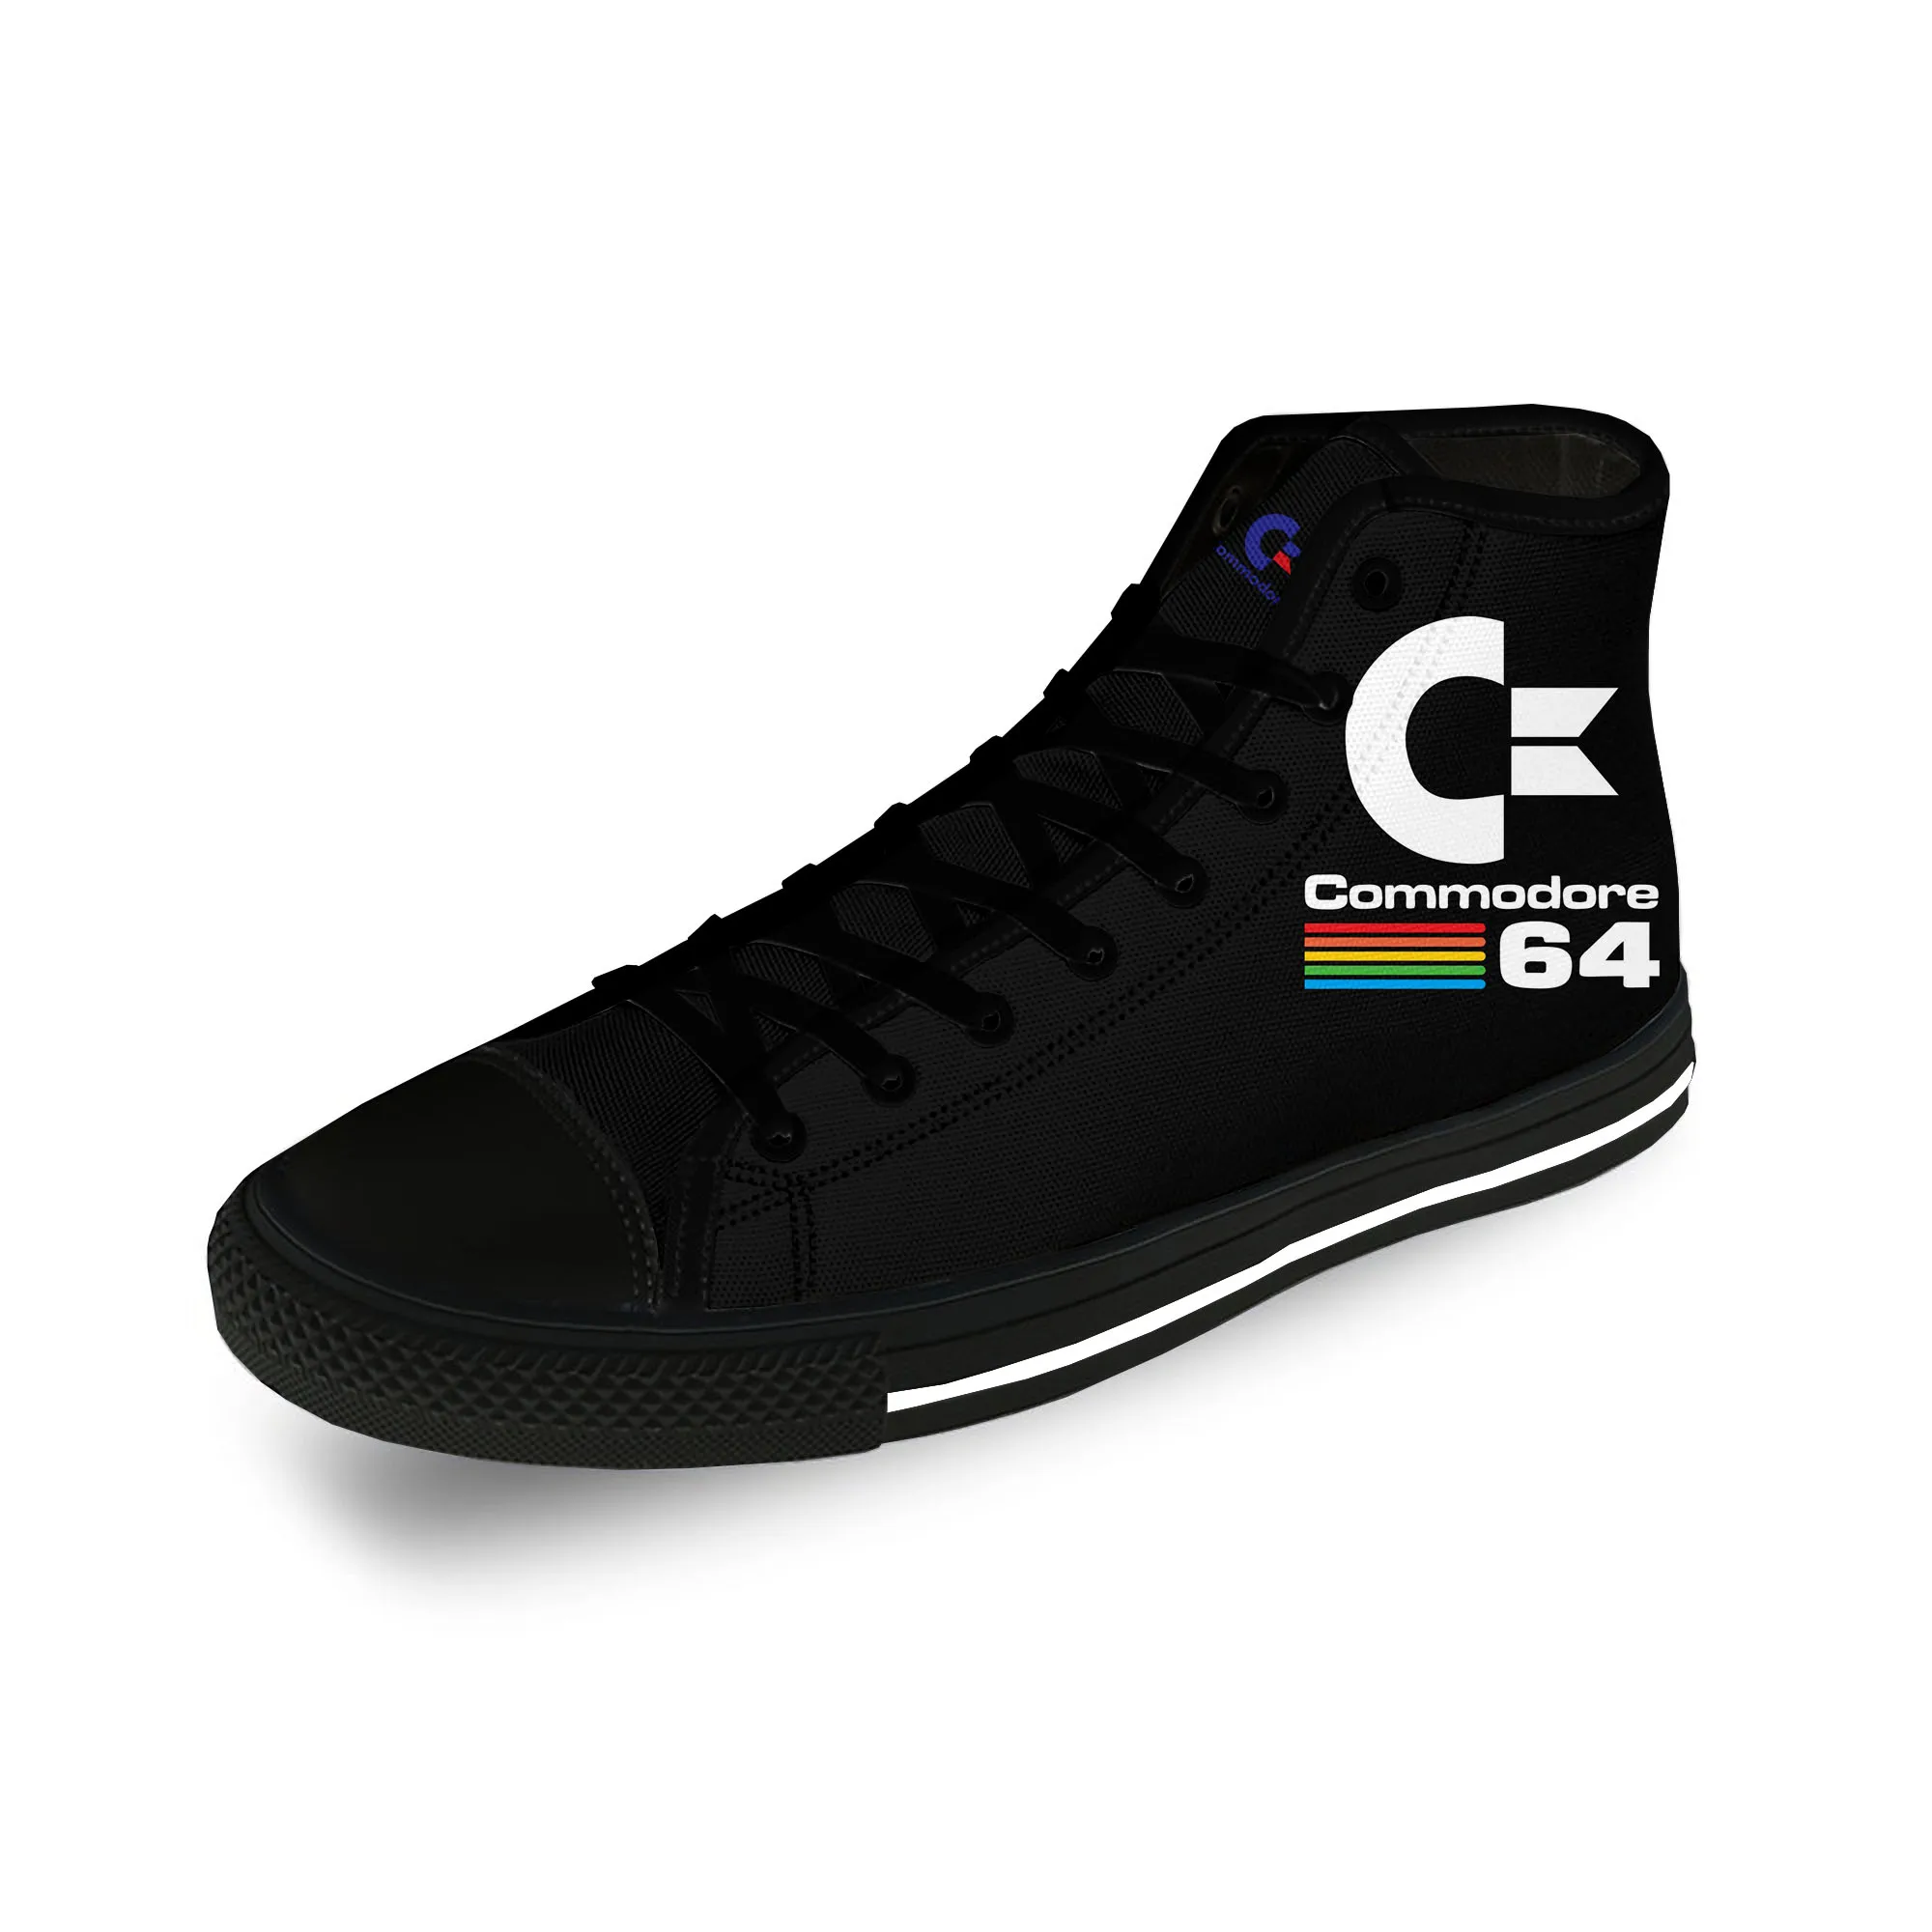 

Commodore C64 SID Amiga Computer Casual Cloth Fashion 3D Print High Top Canvas Shoes Men Women Lightweight Breathable Sneakers